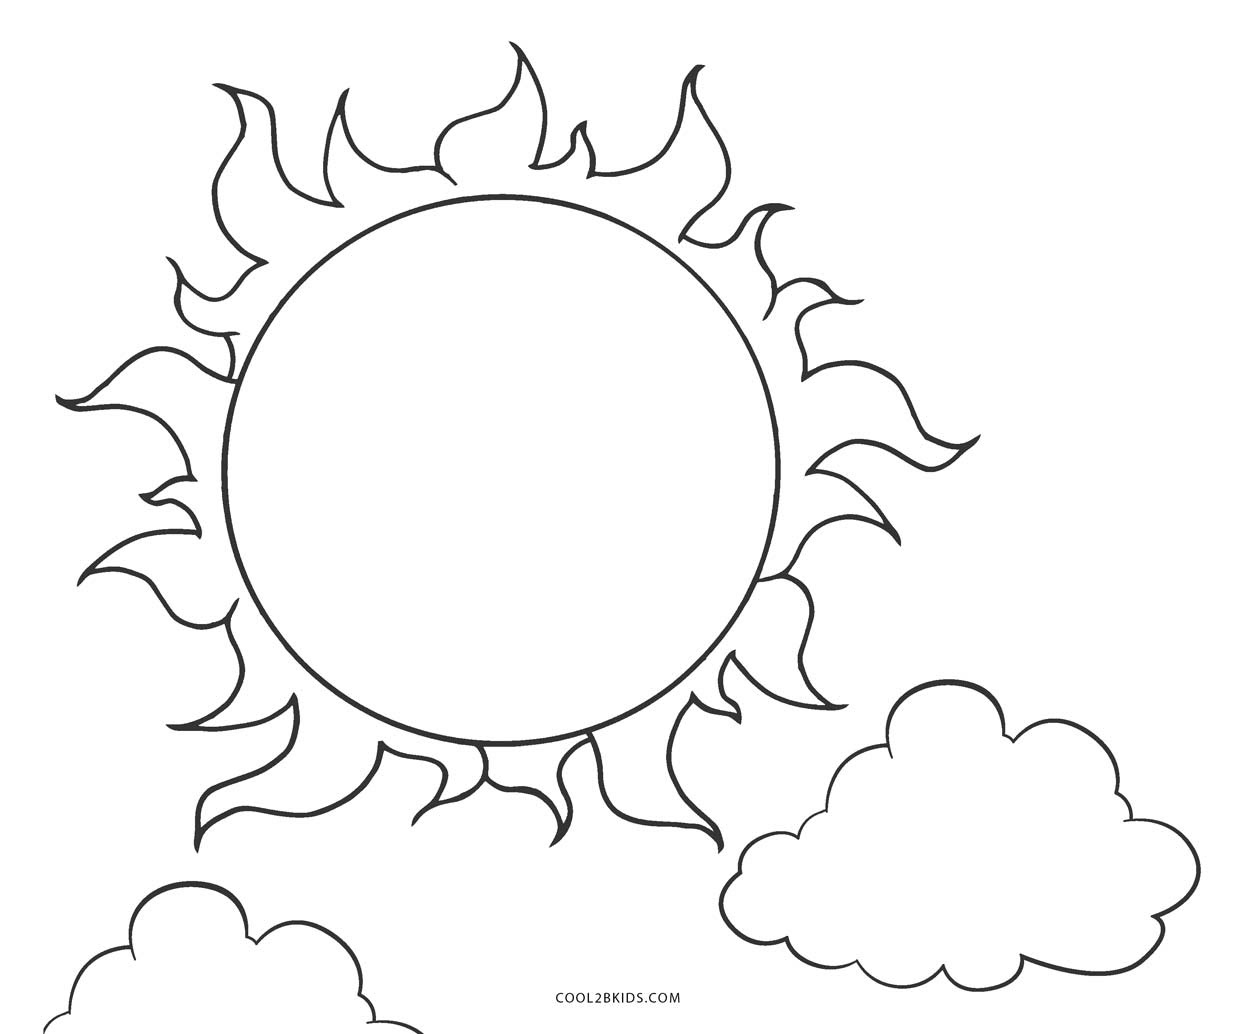 Download Happy Star Sun Coloring Page Wecoloringpage.com - Coloring Pages